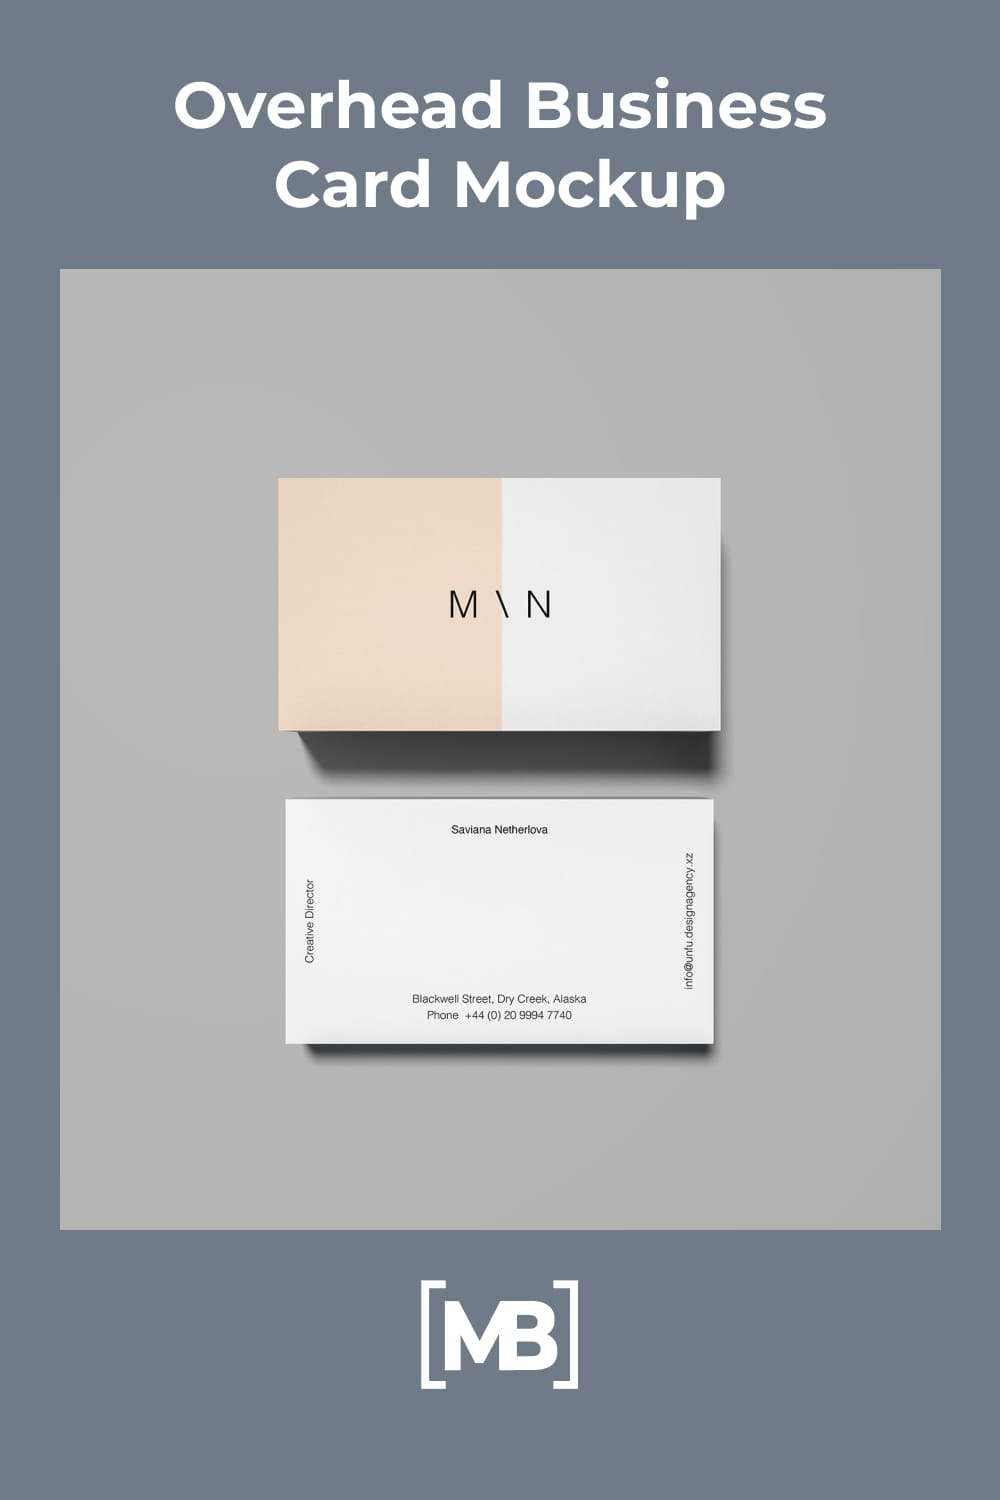 The pastel colors and clean design make this business card especially beautiful.